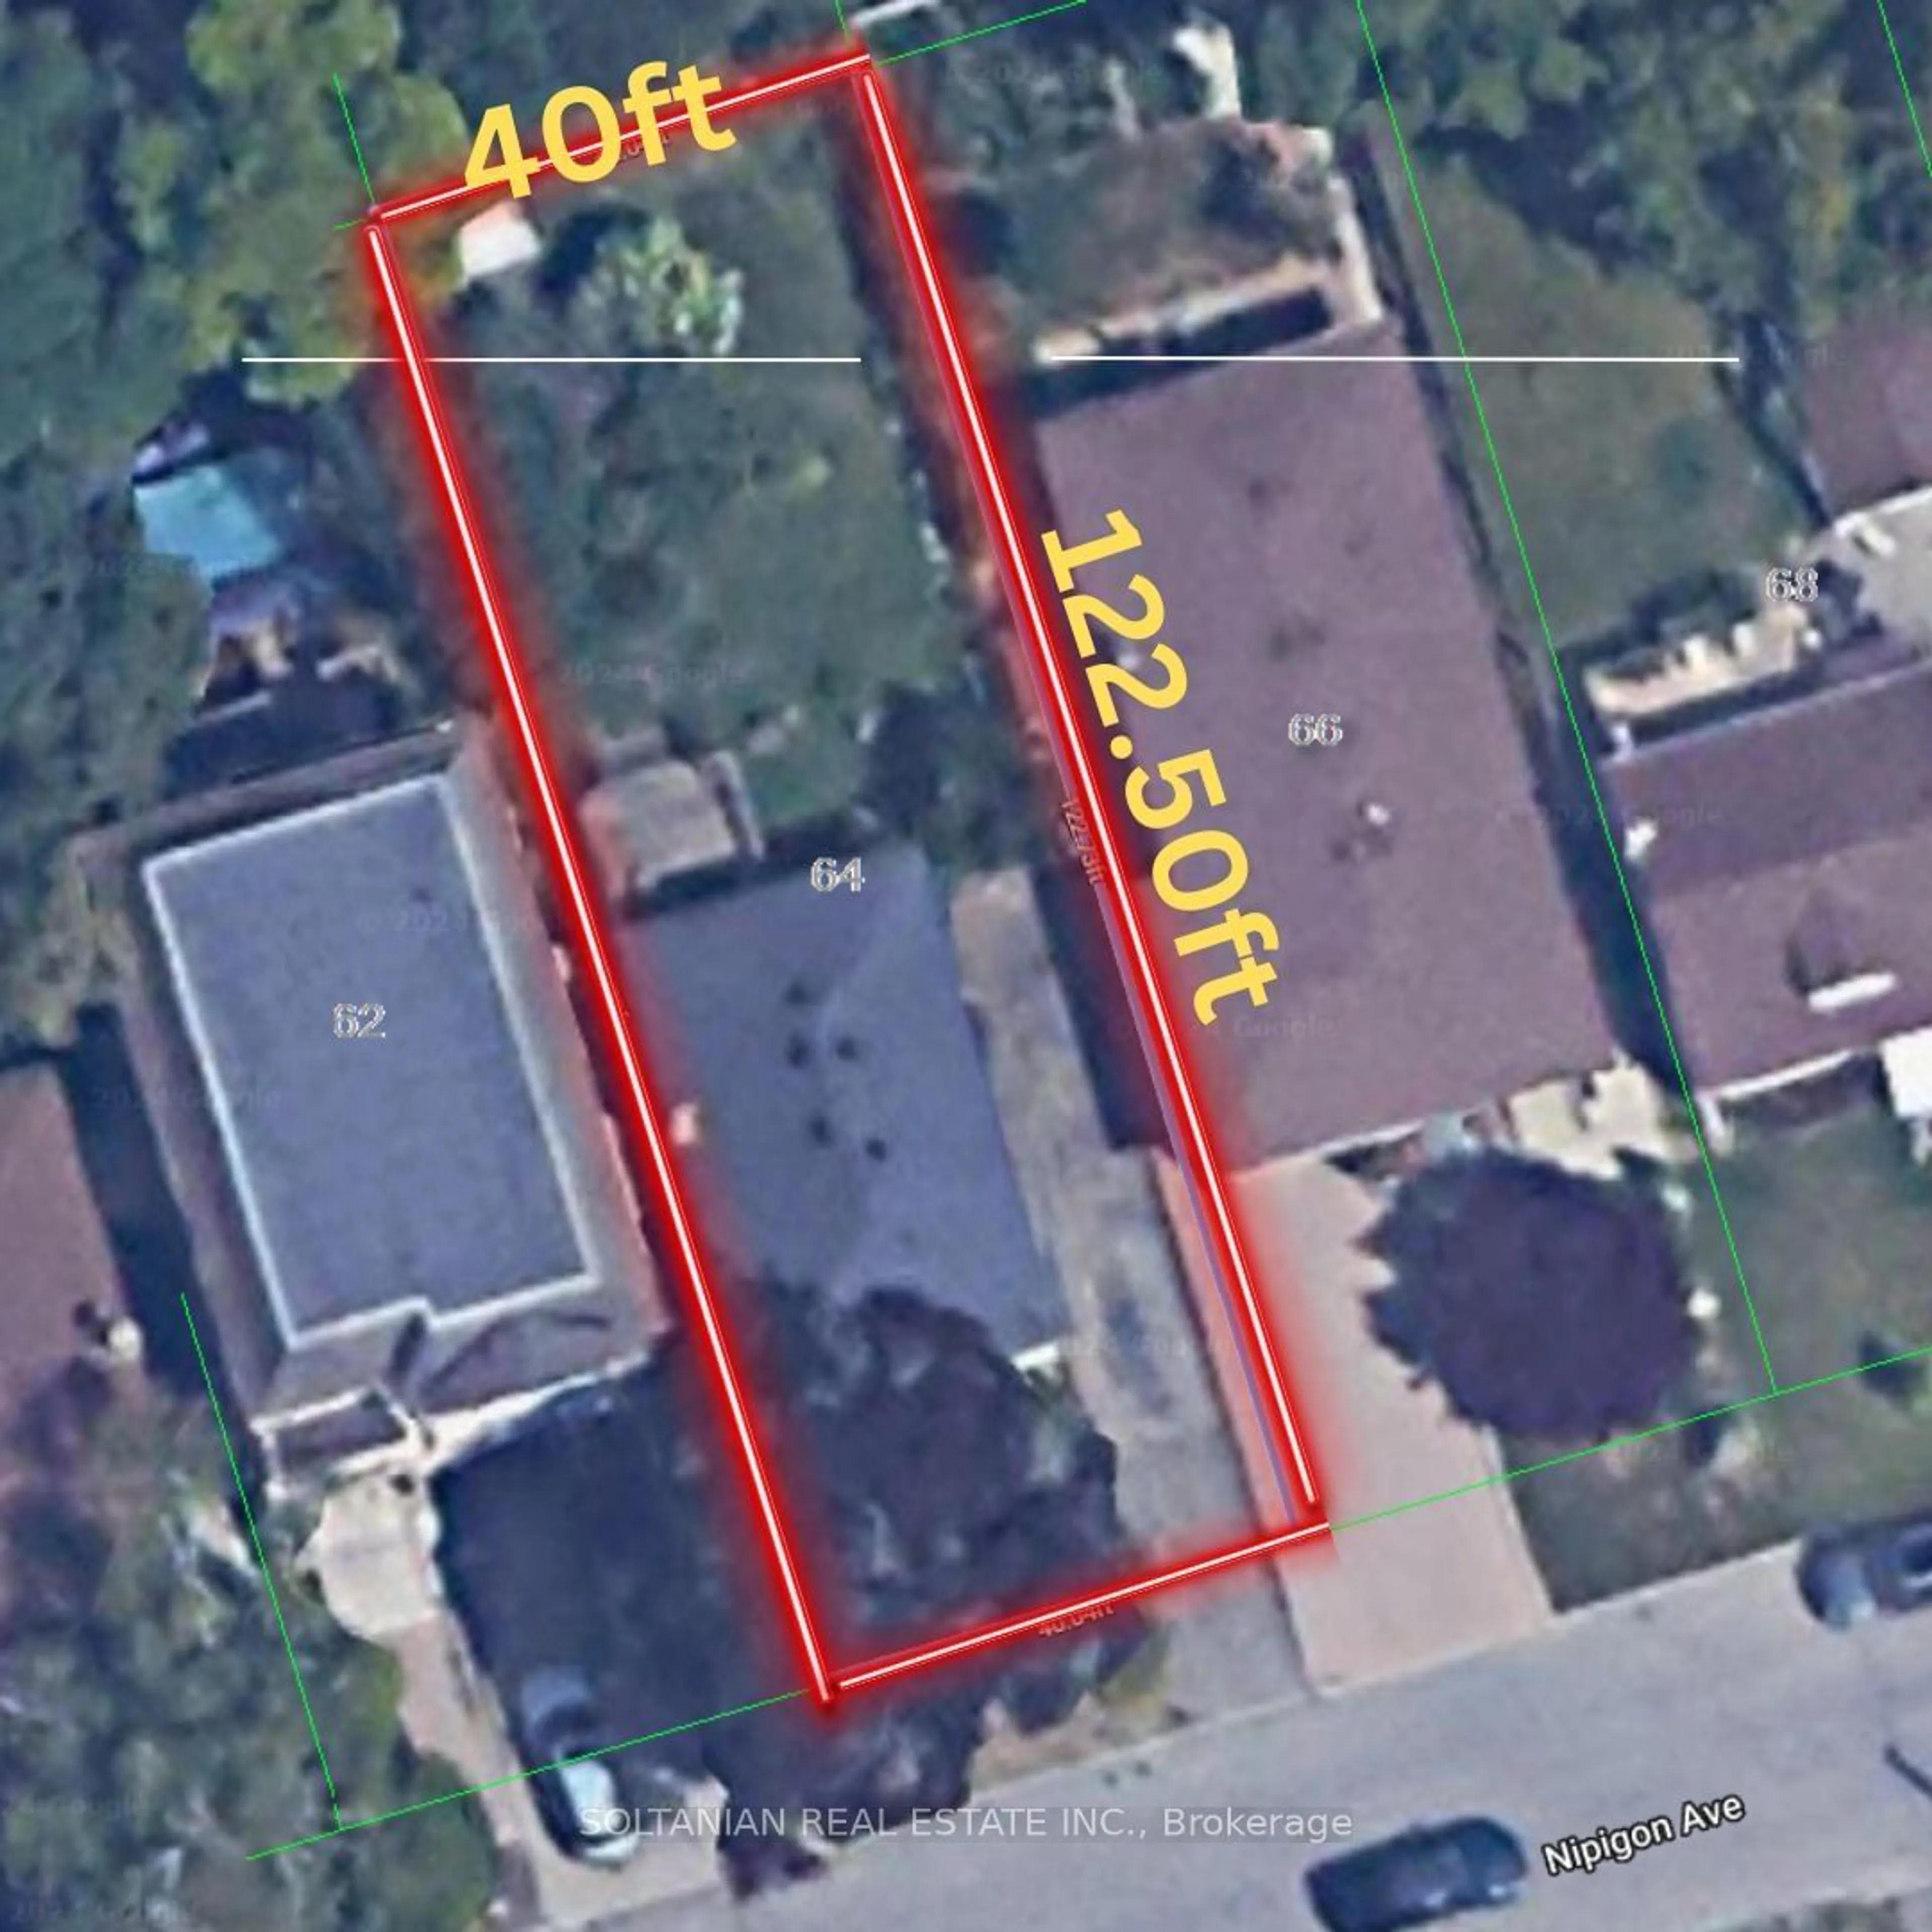 Frontside or backside of a home for 64 Nipigon Ave, Toronto Ontario M2M 2W1